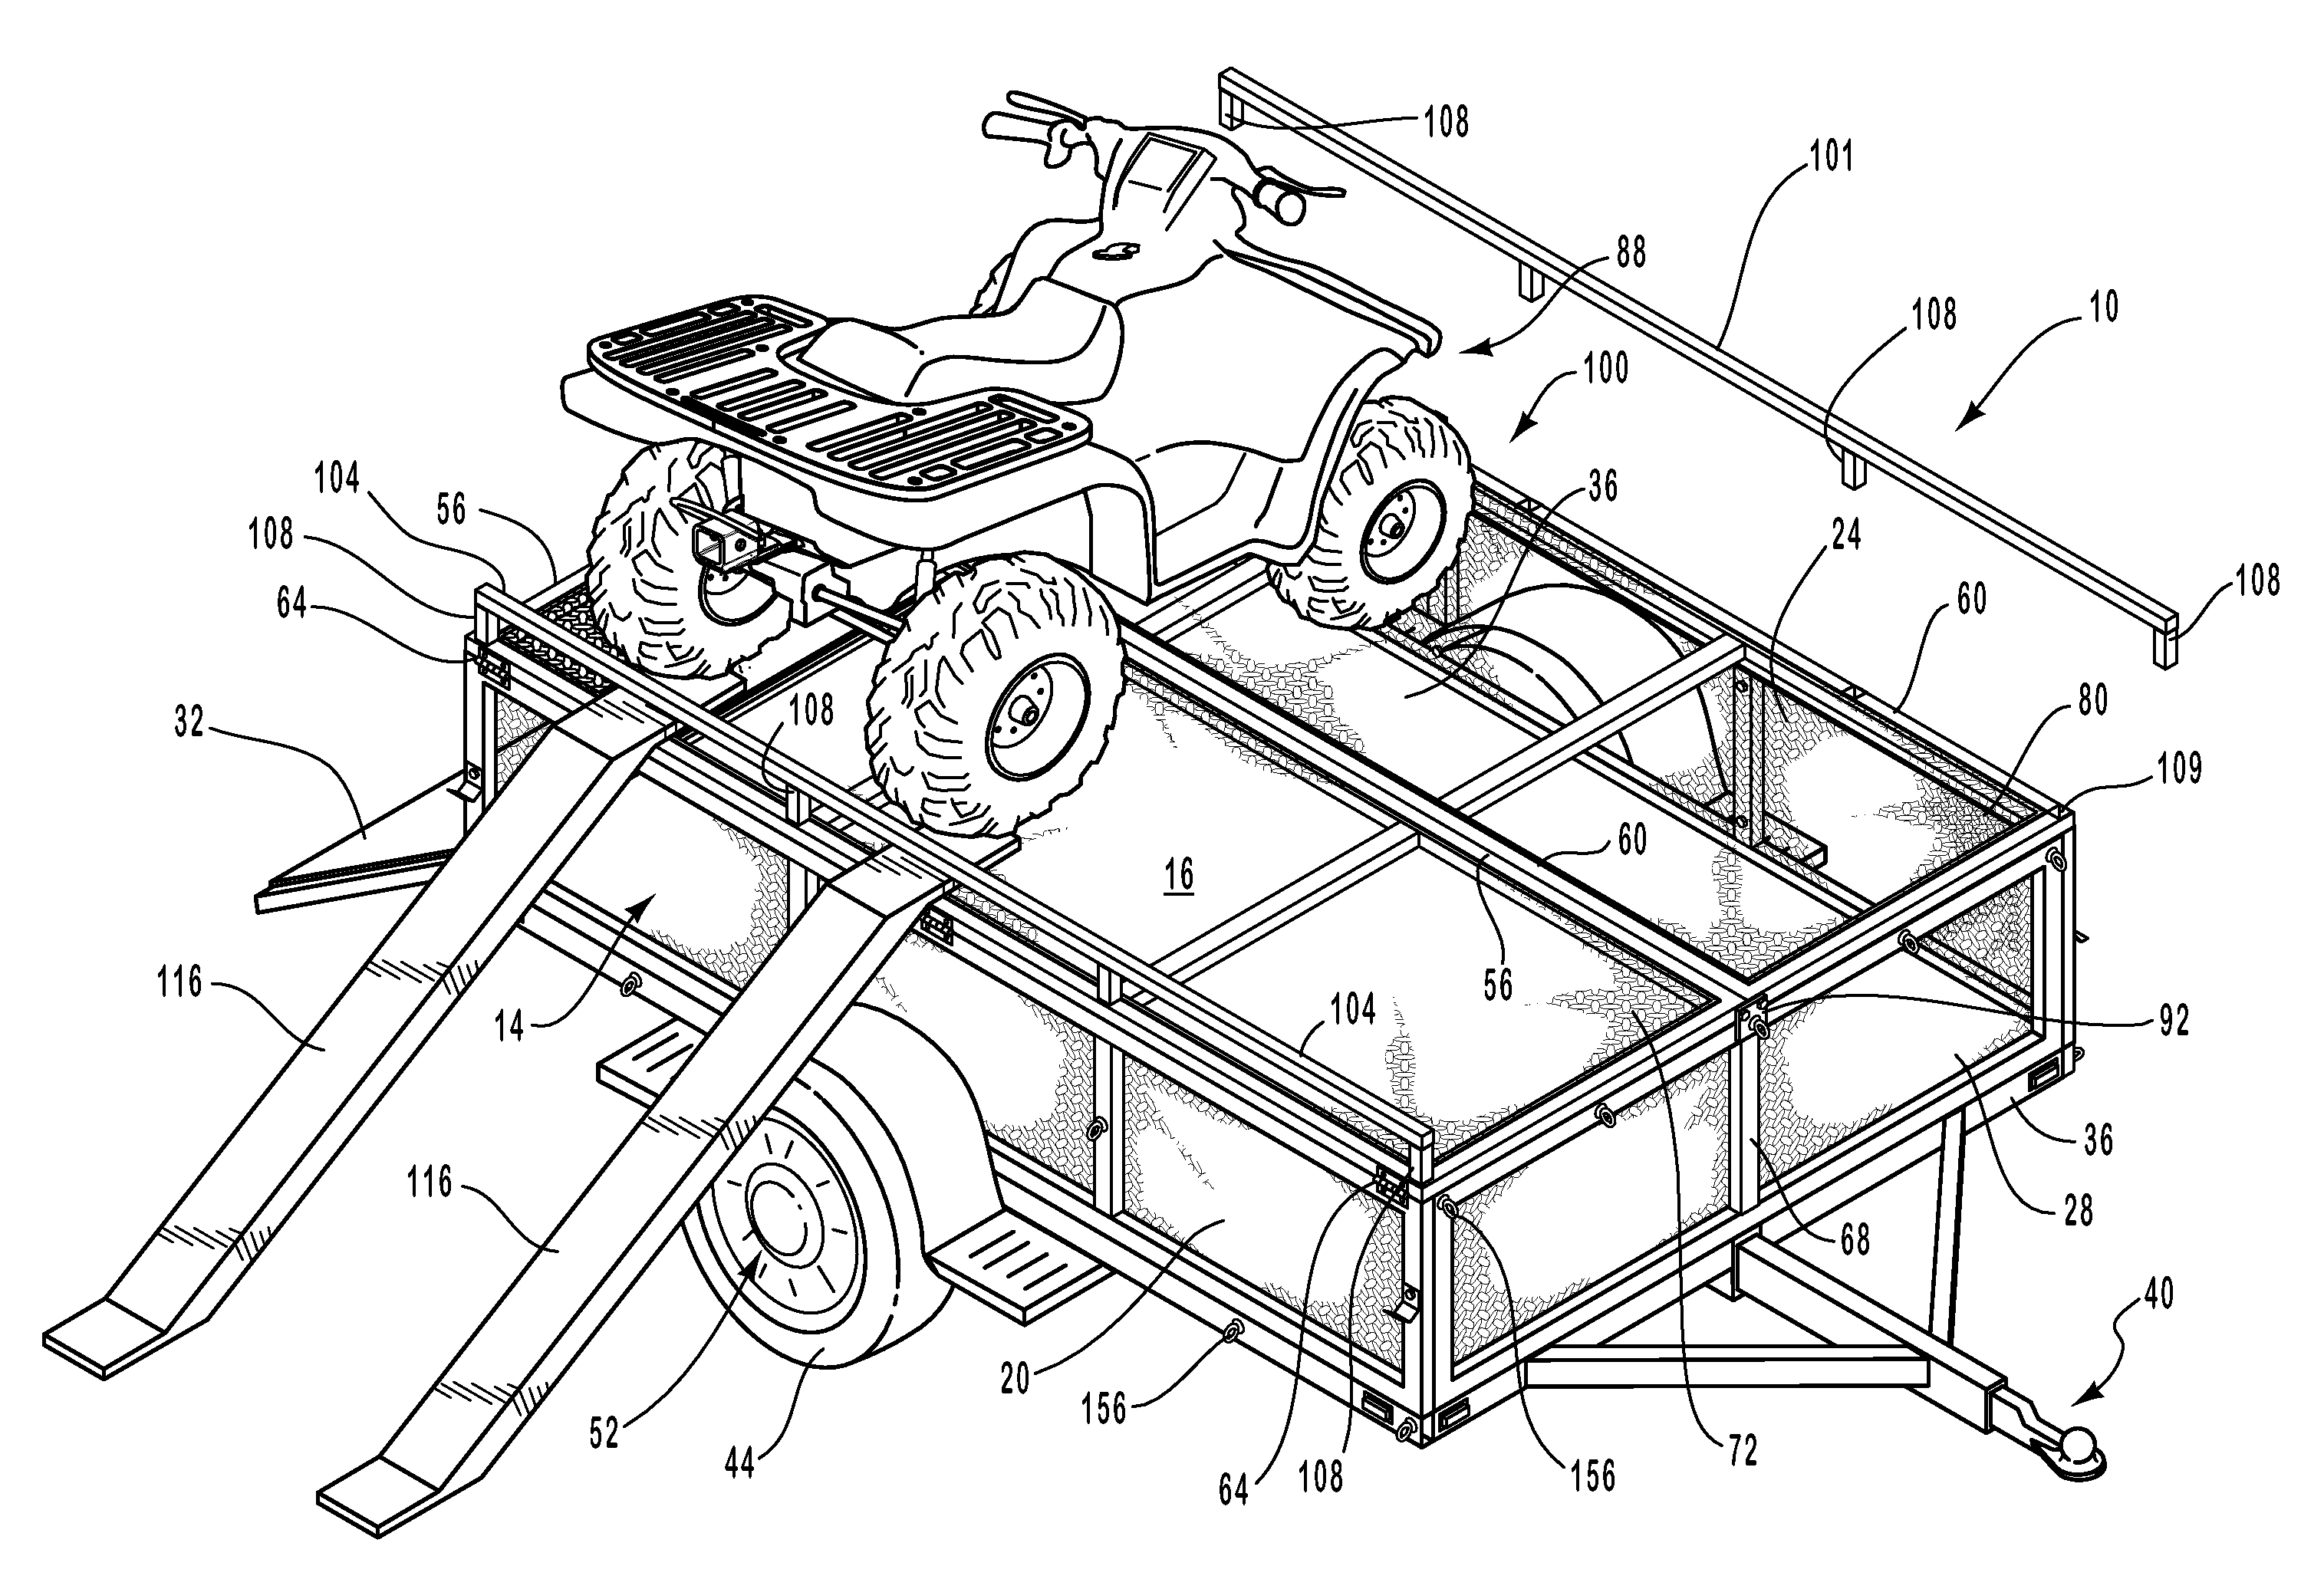 Tent assembly for use with utility trailers and vehicles